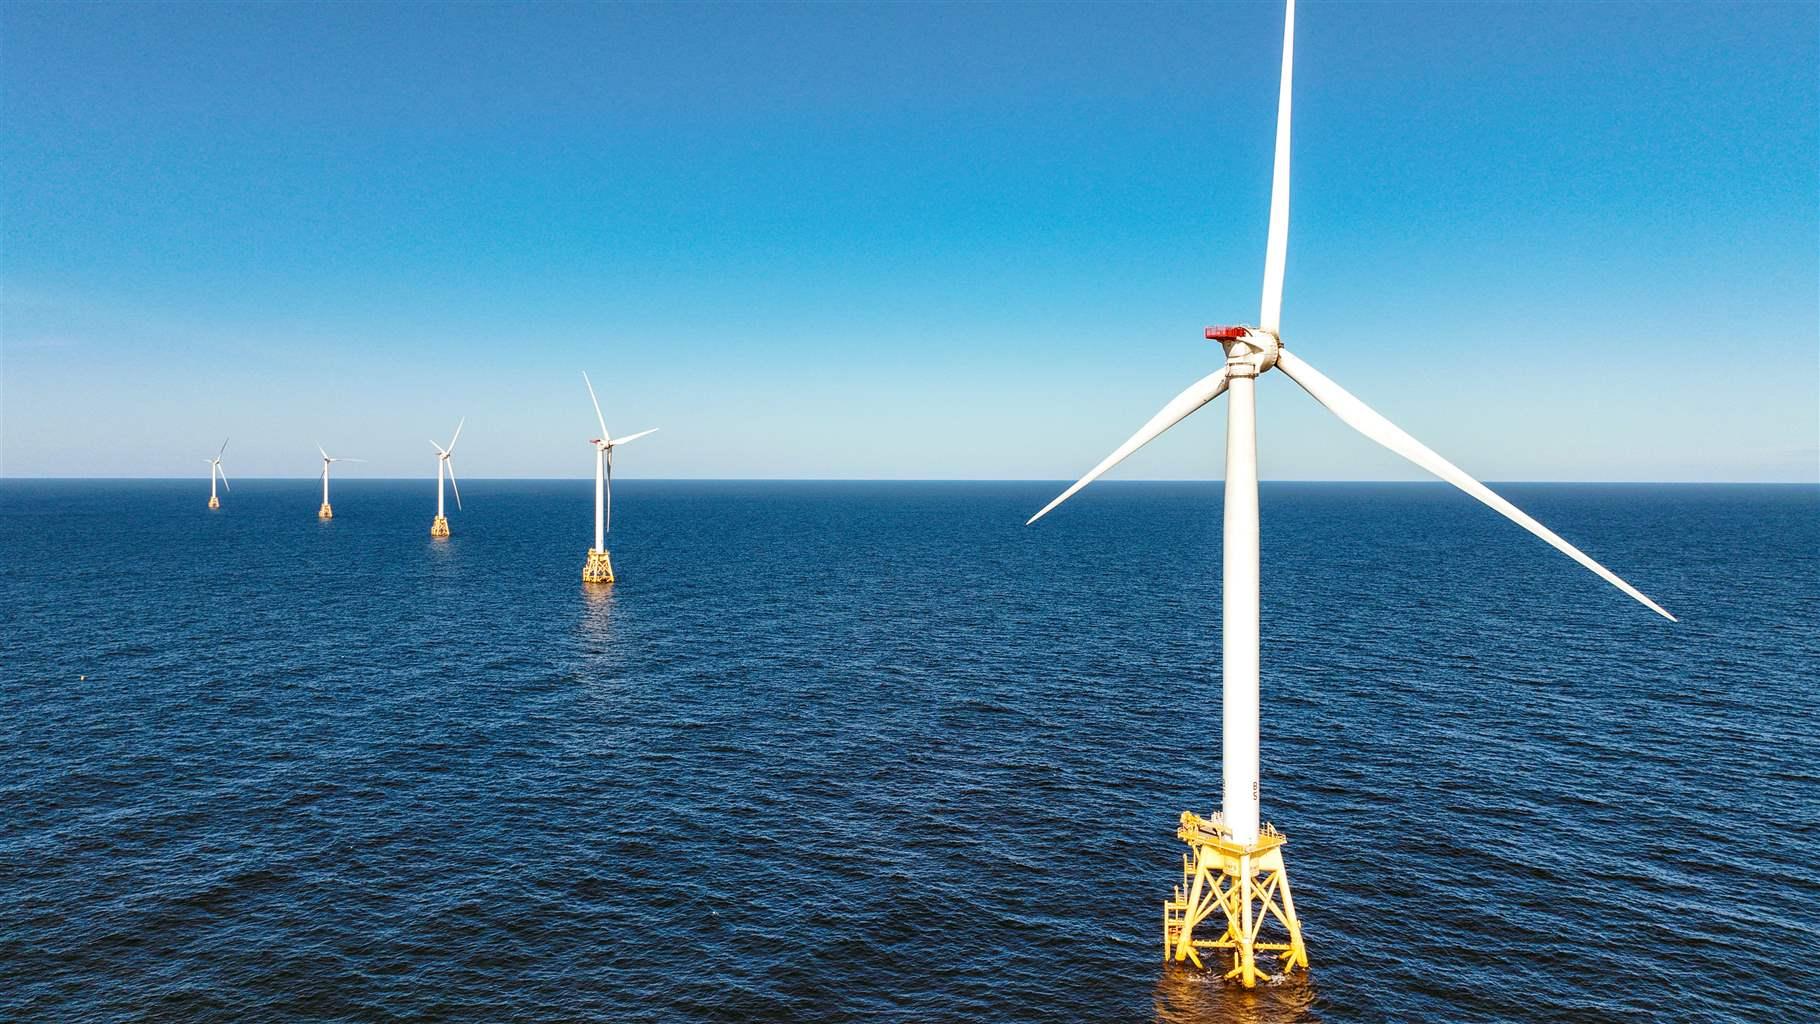  Five windmills mounted on small, yellow platforms run diagonally out to a light blue horizon where the sky meets the darker blue ocean. 